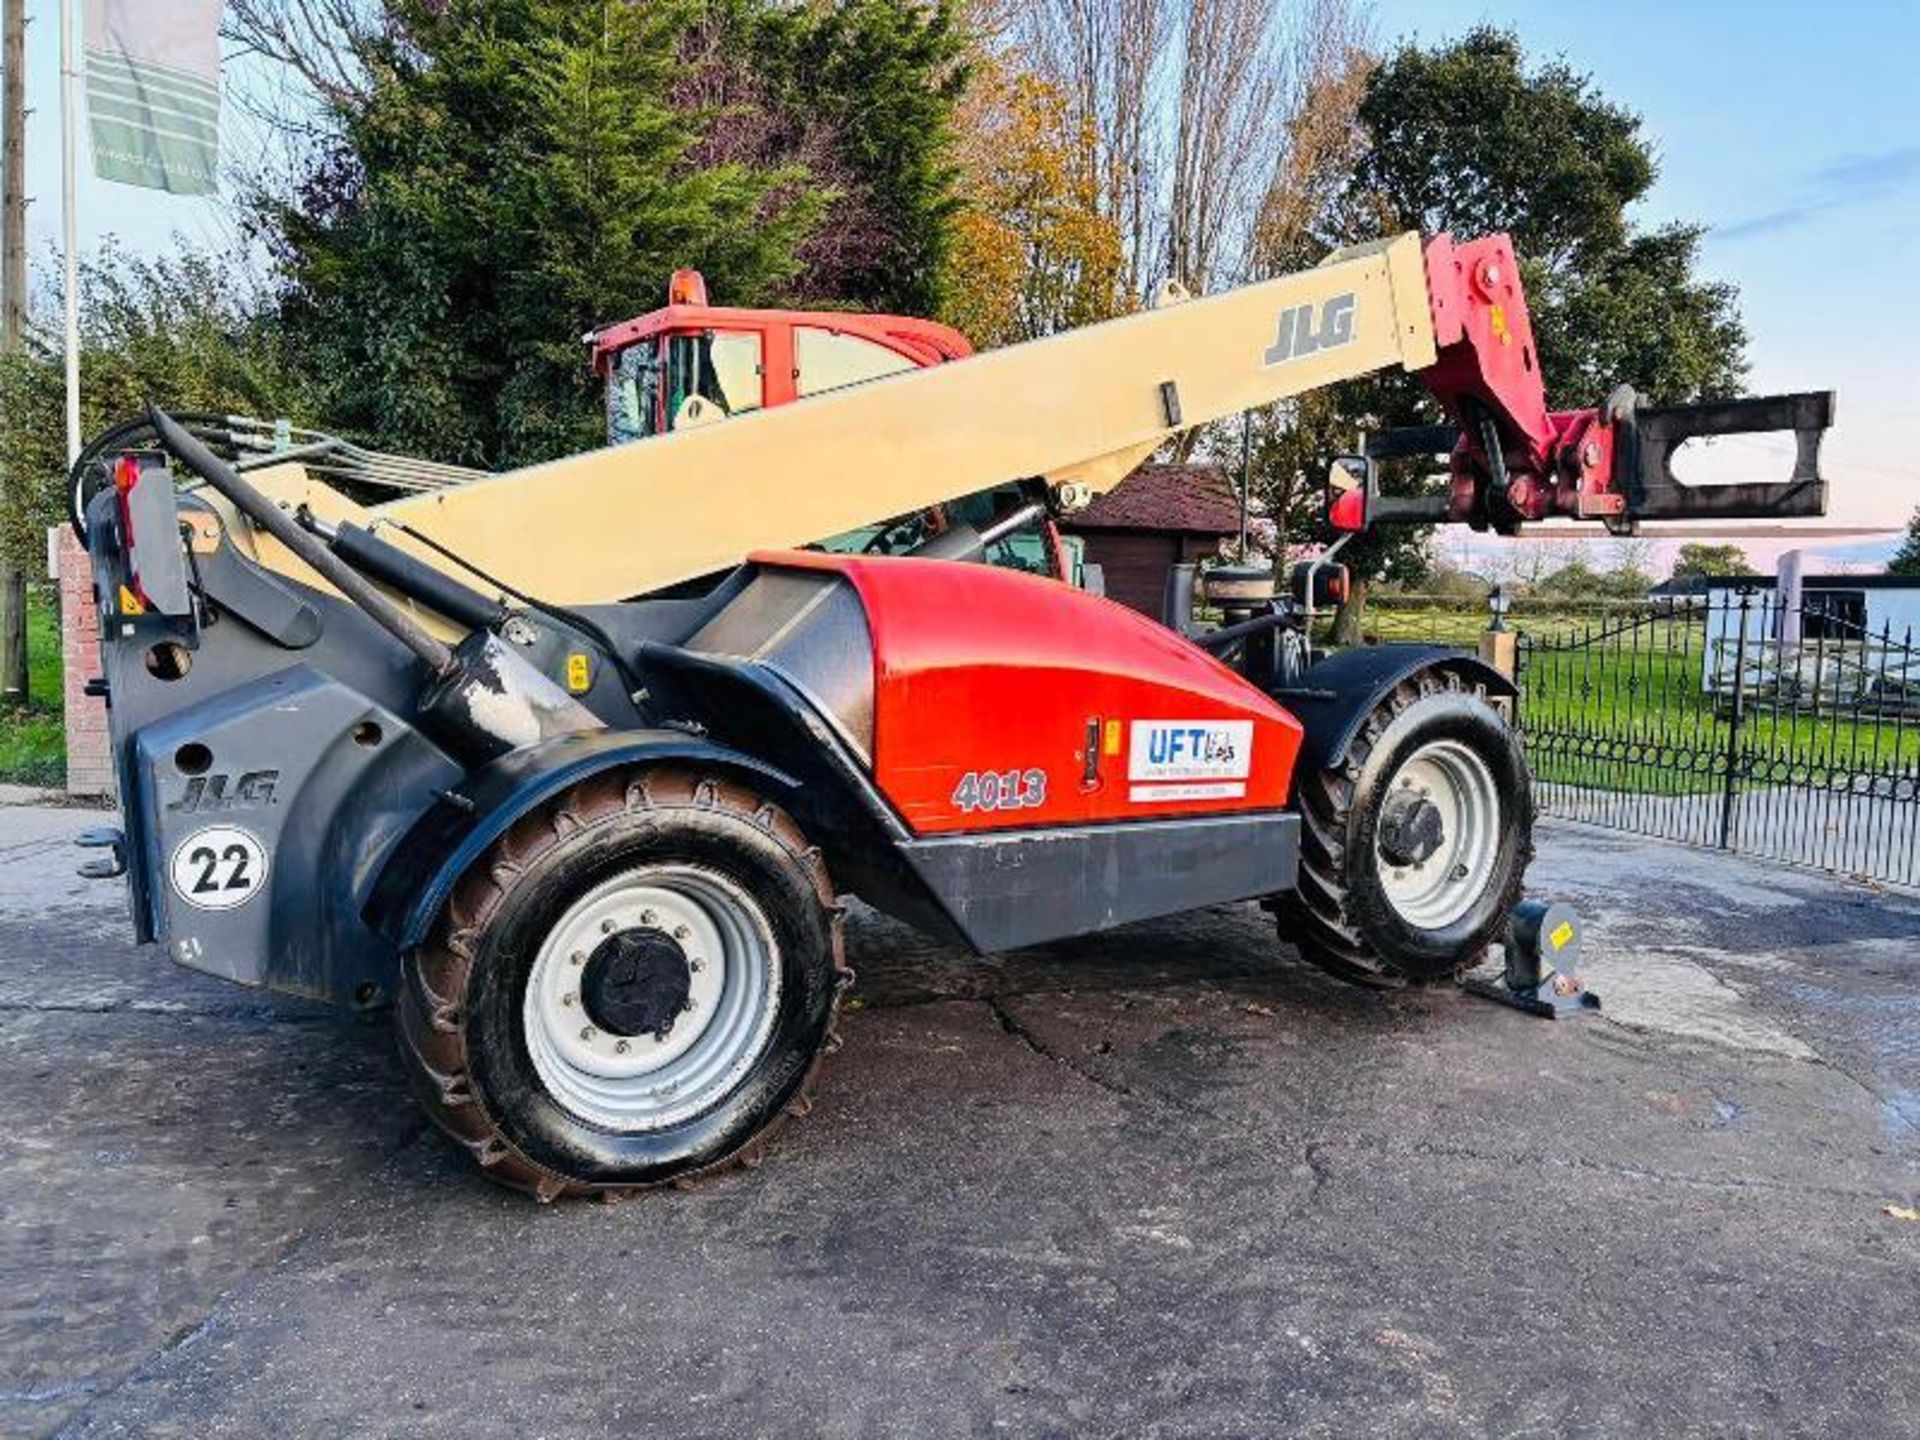 JLG 4013 4WD TELEHANDLER *YEAR 2007, 6881 HOURS* C/W LONG PALLET TINES - Image 9 of 20